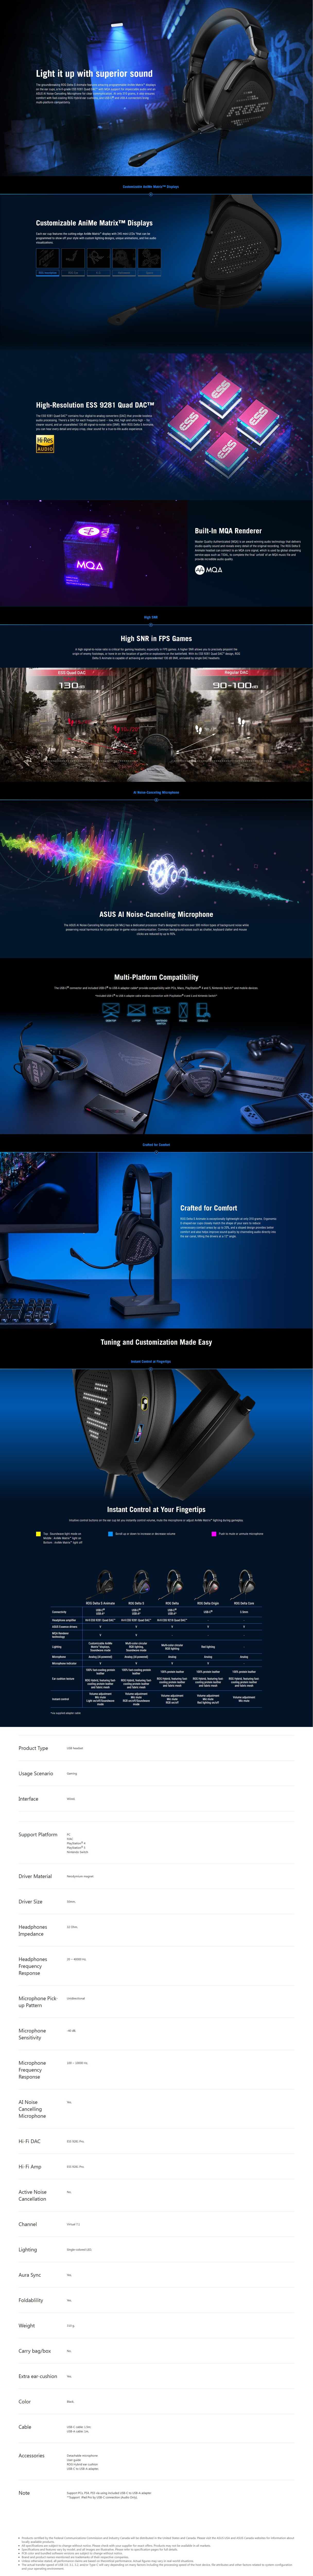 A large marketing image providing additional information about the product ASUS ROG Delta S Animate Wired Gaming Headset - Additional alt info not provided